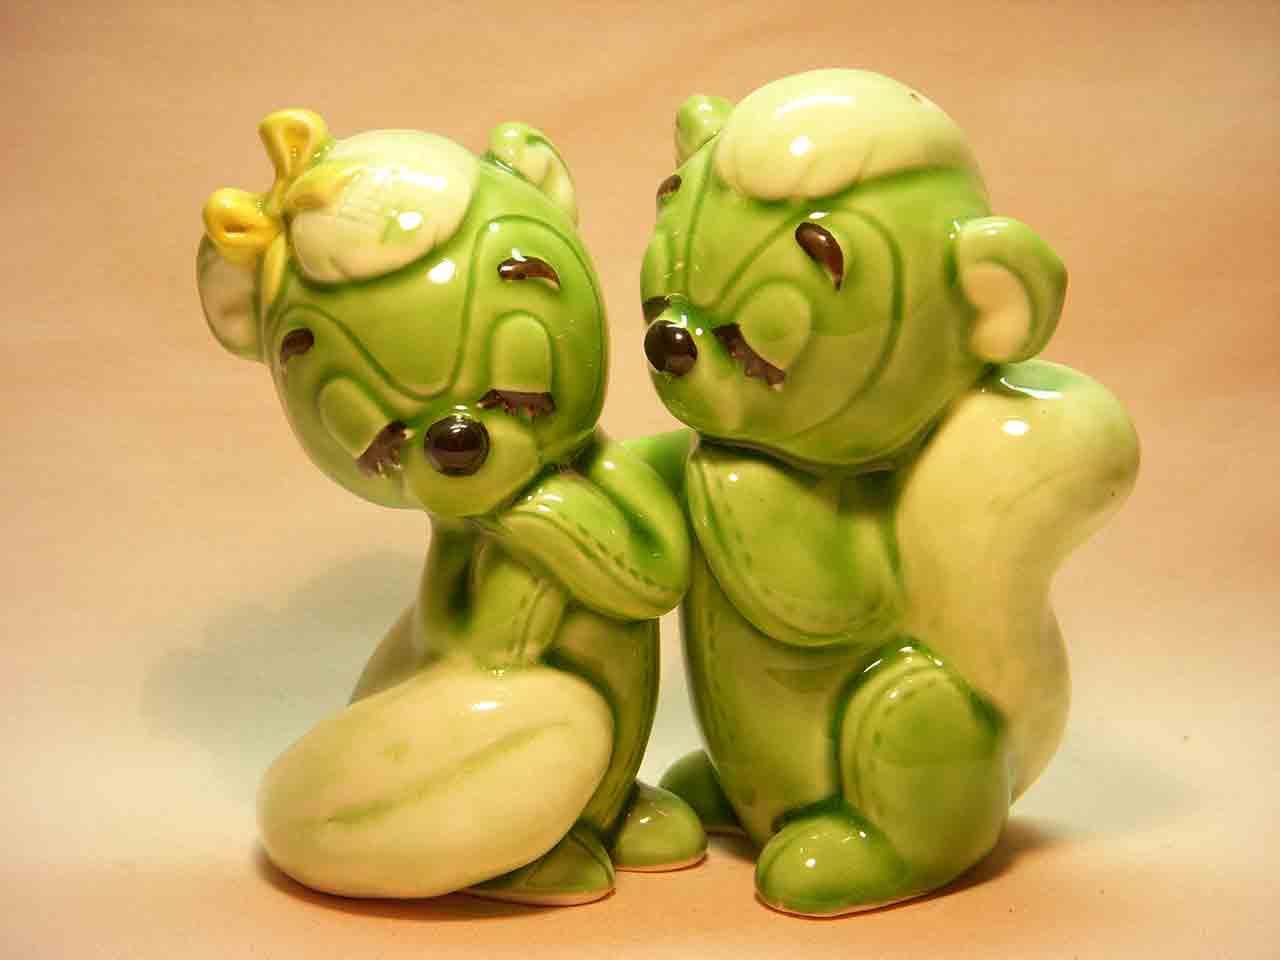 Animal Couples - Boy with Arm Around Girl salt and pepper shakers - squirrels